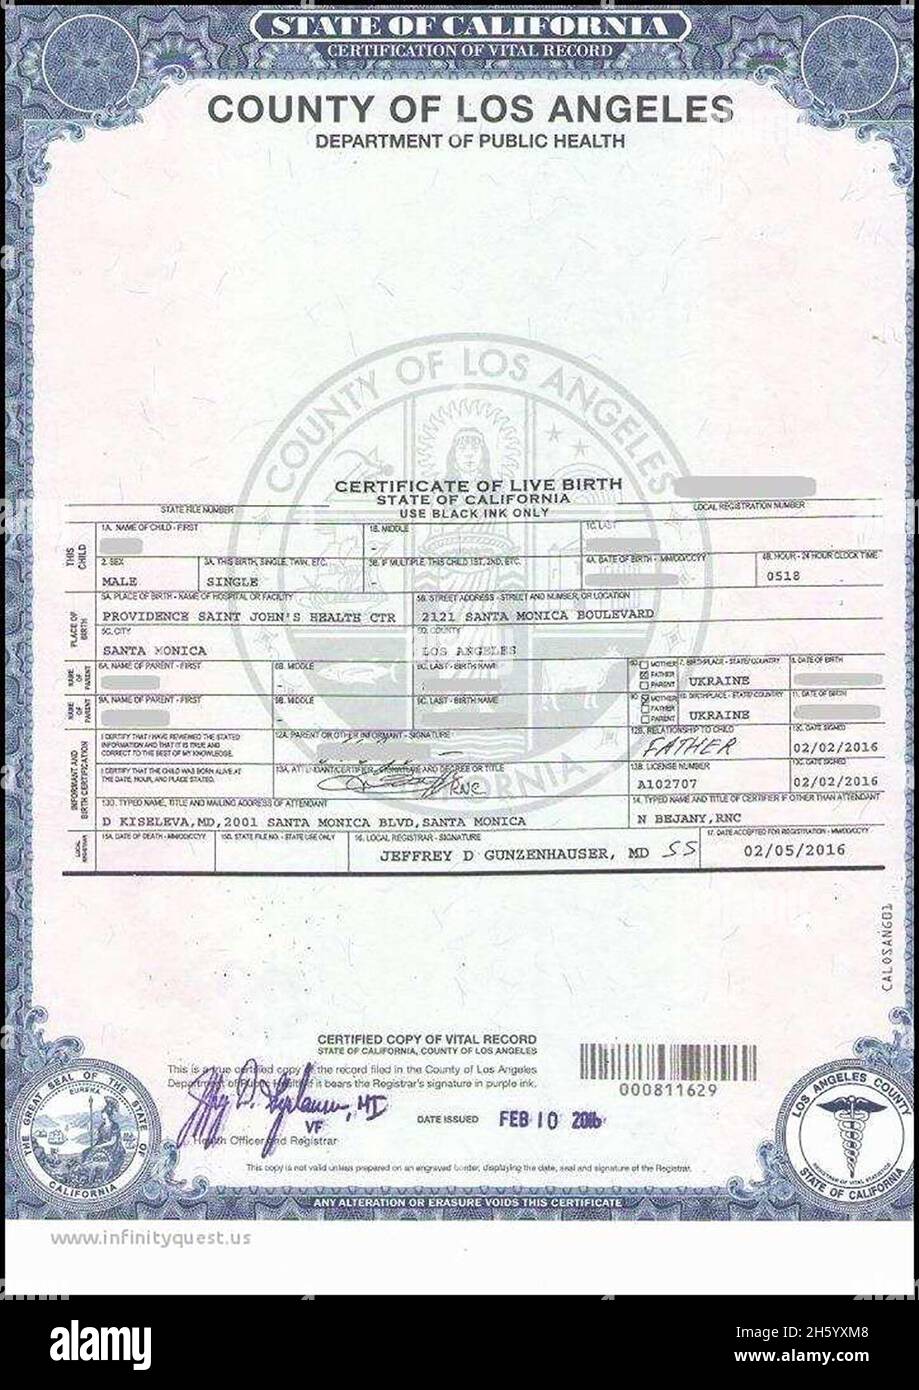 A specimen of the birth certificate from Los Angeles County, California  Stock Photo - Alamy